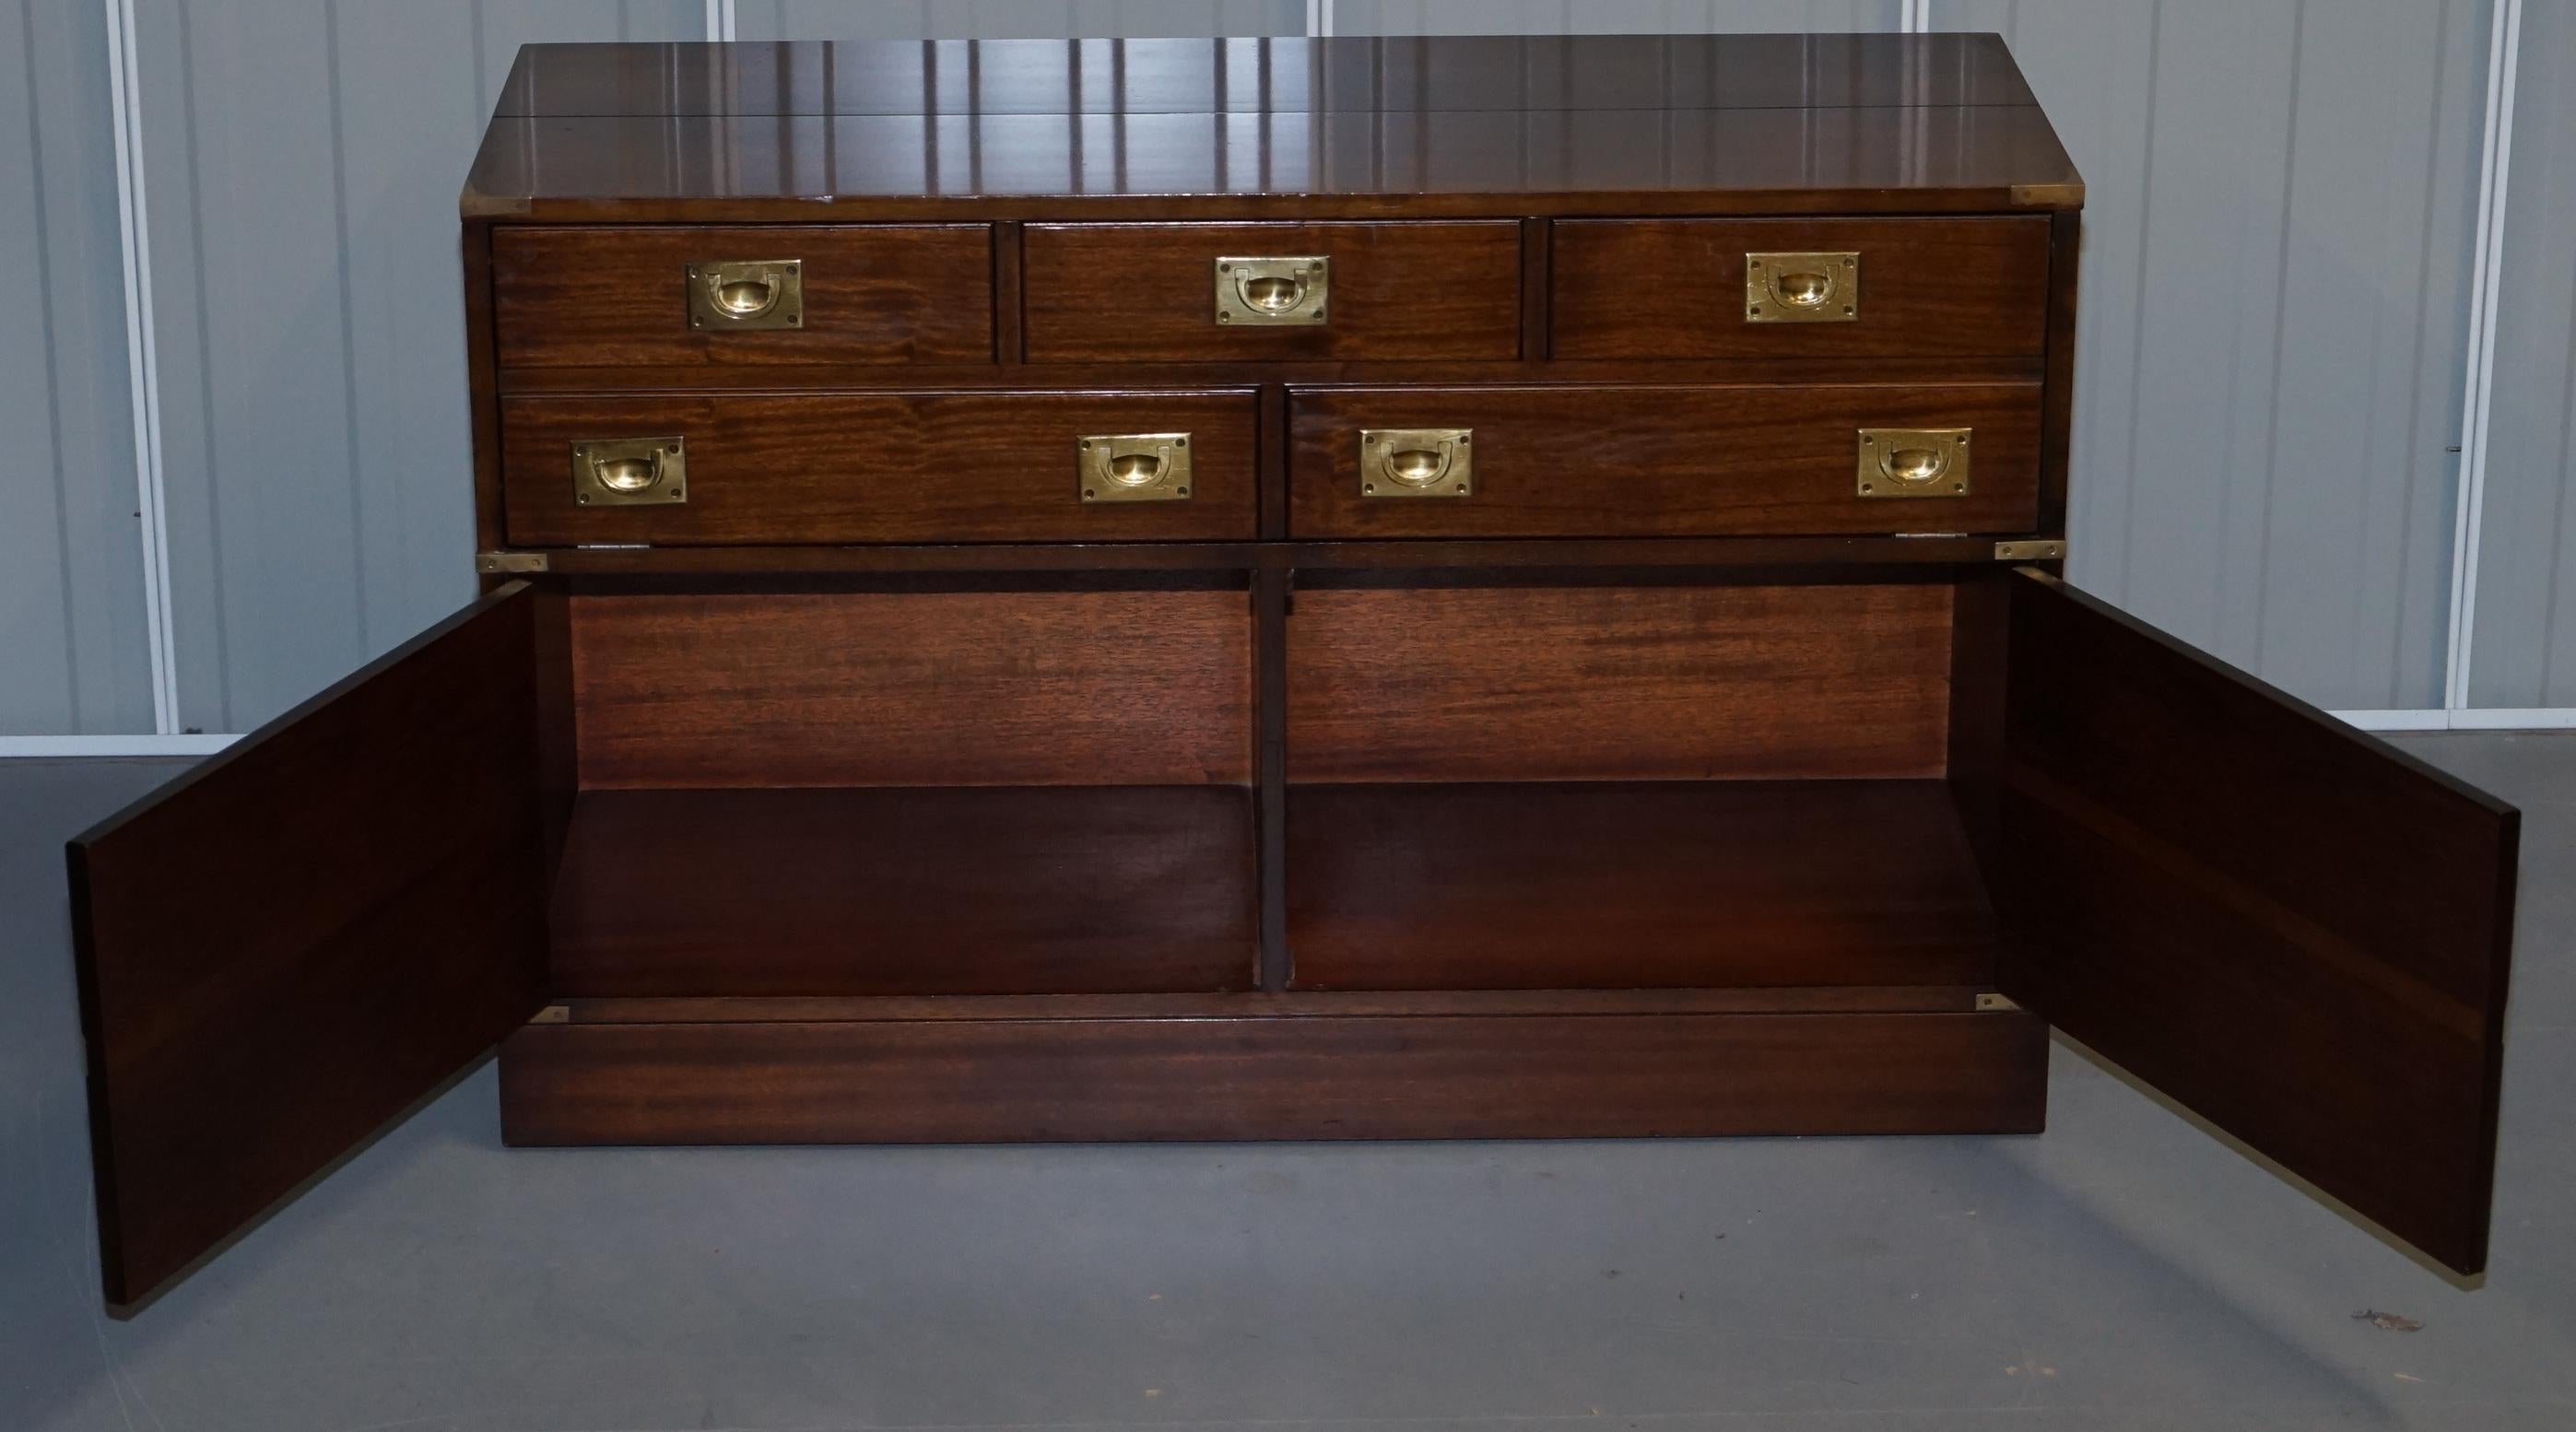 20th Century RECORD PLAYER CABINET HIDDEN INSIDE MILITARY CAMPAIGN CHEST CHEST OF DRAWERs